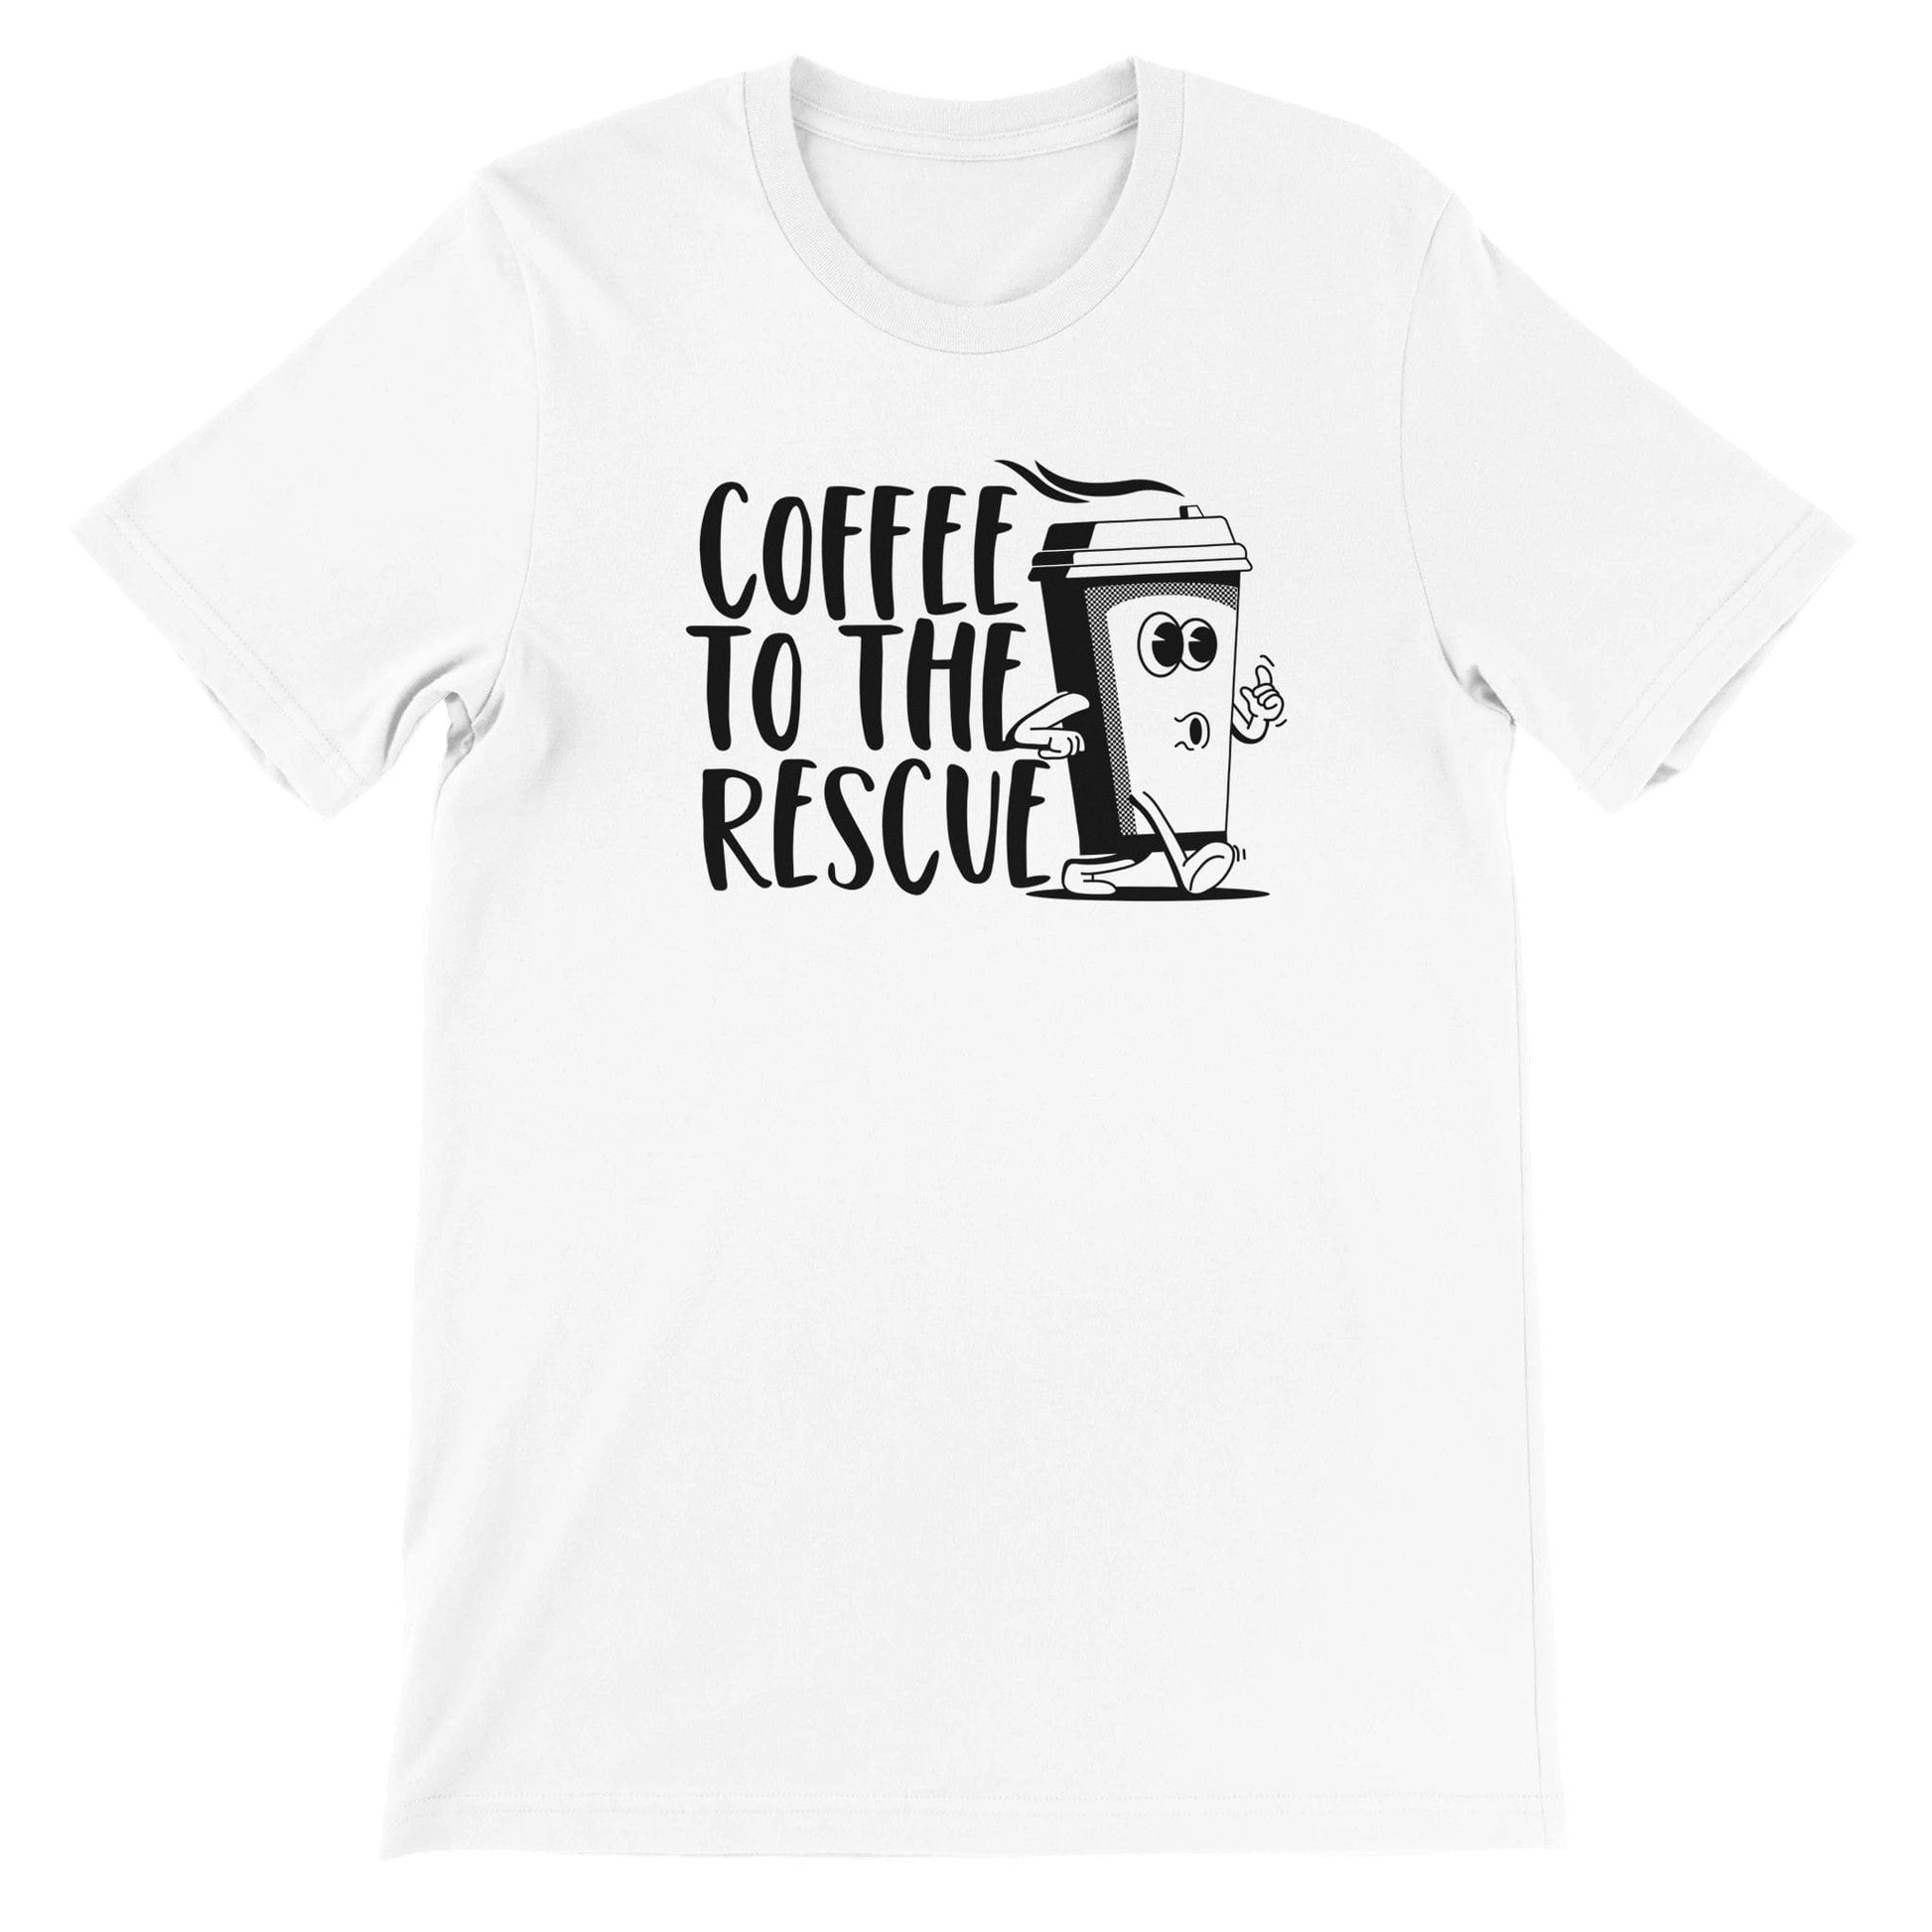 Good Bean Gifts Coffee To The Rescue - ALT design Unisex Crewneck T-shirt